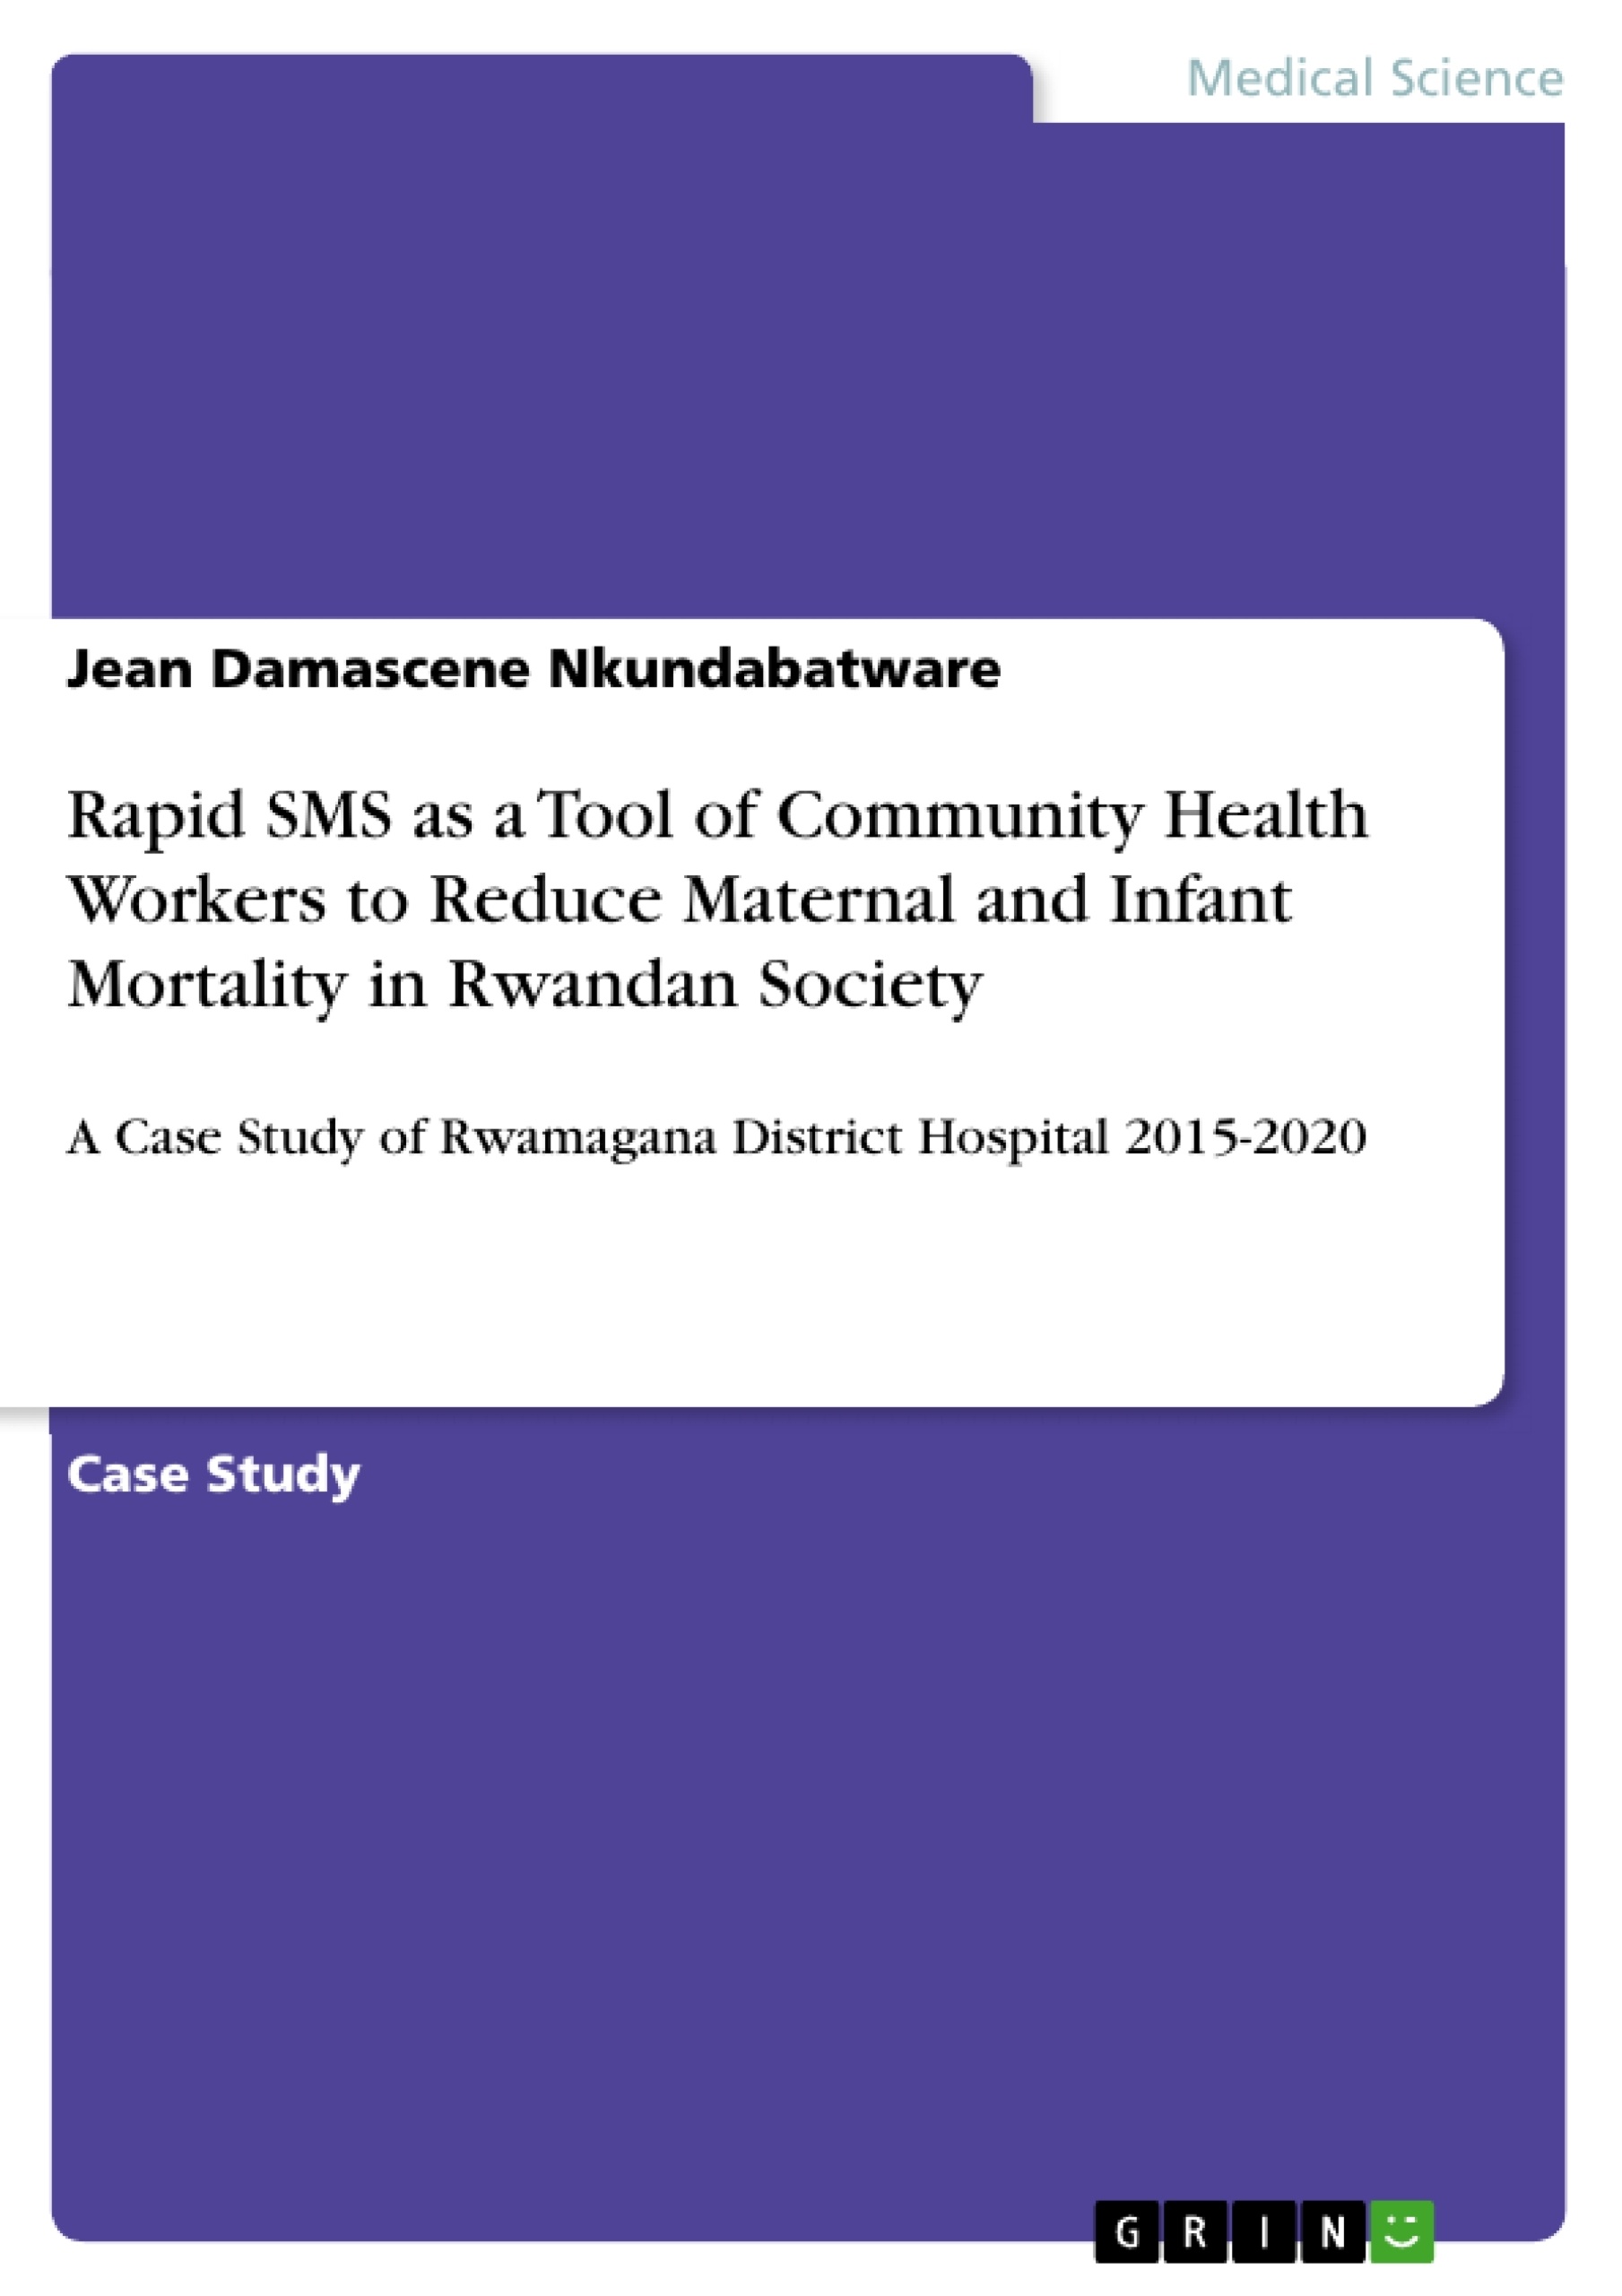 Título: Rapid SMS as a Tool of Community Health Workers to Reduce Maternal and Infant Mortality in Rwandan Society